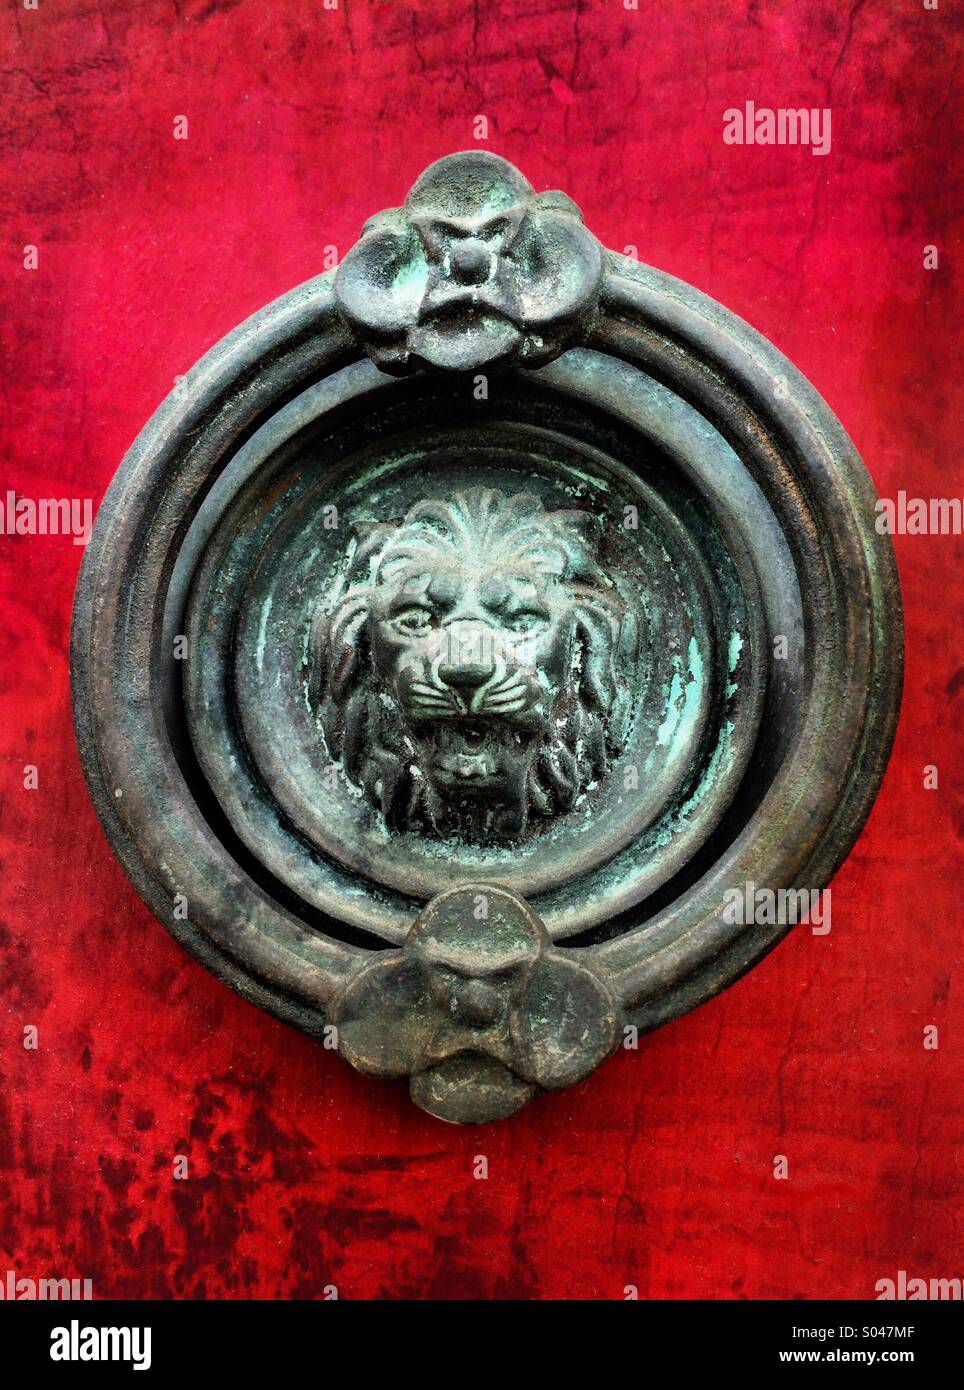 Am old copper door knocker of a lion's head is a strong contrast to a red door. Stock Photo